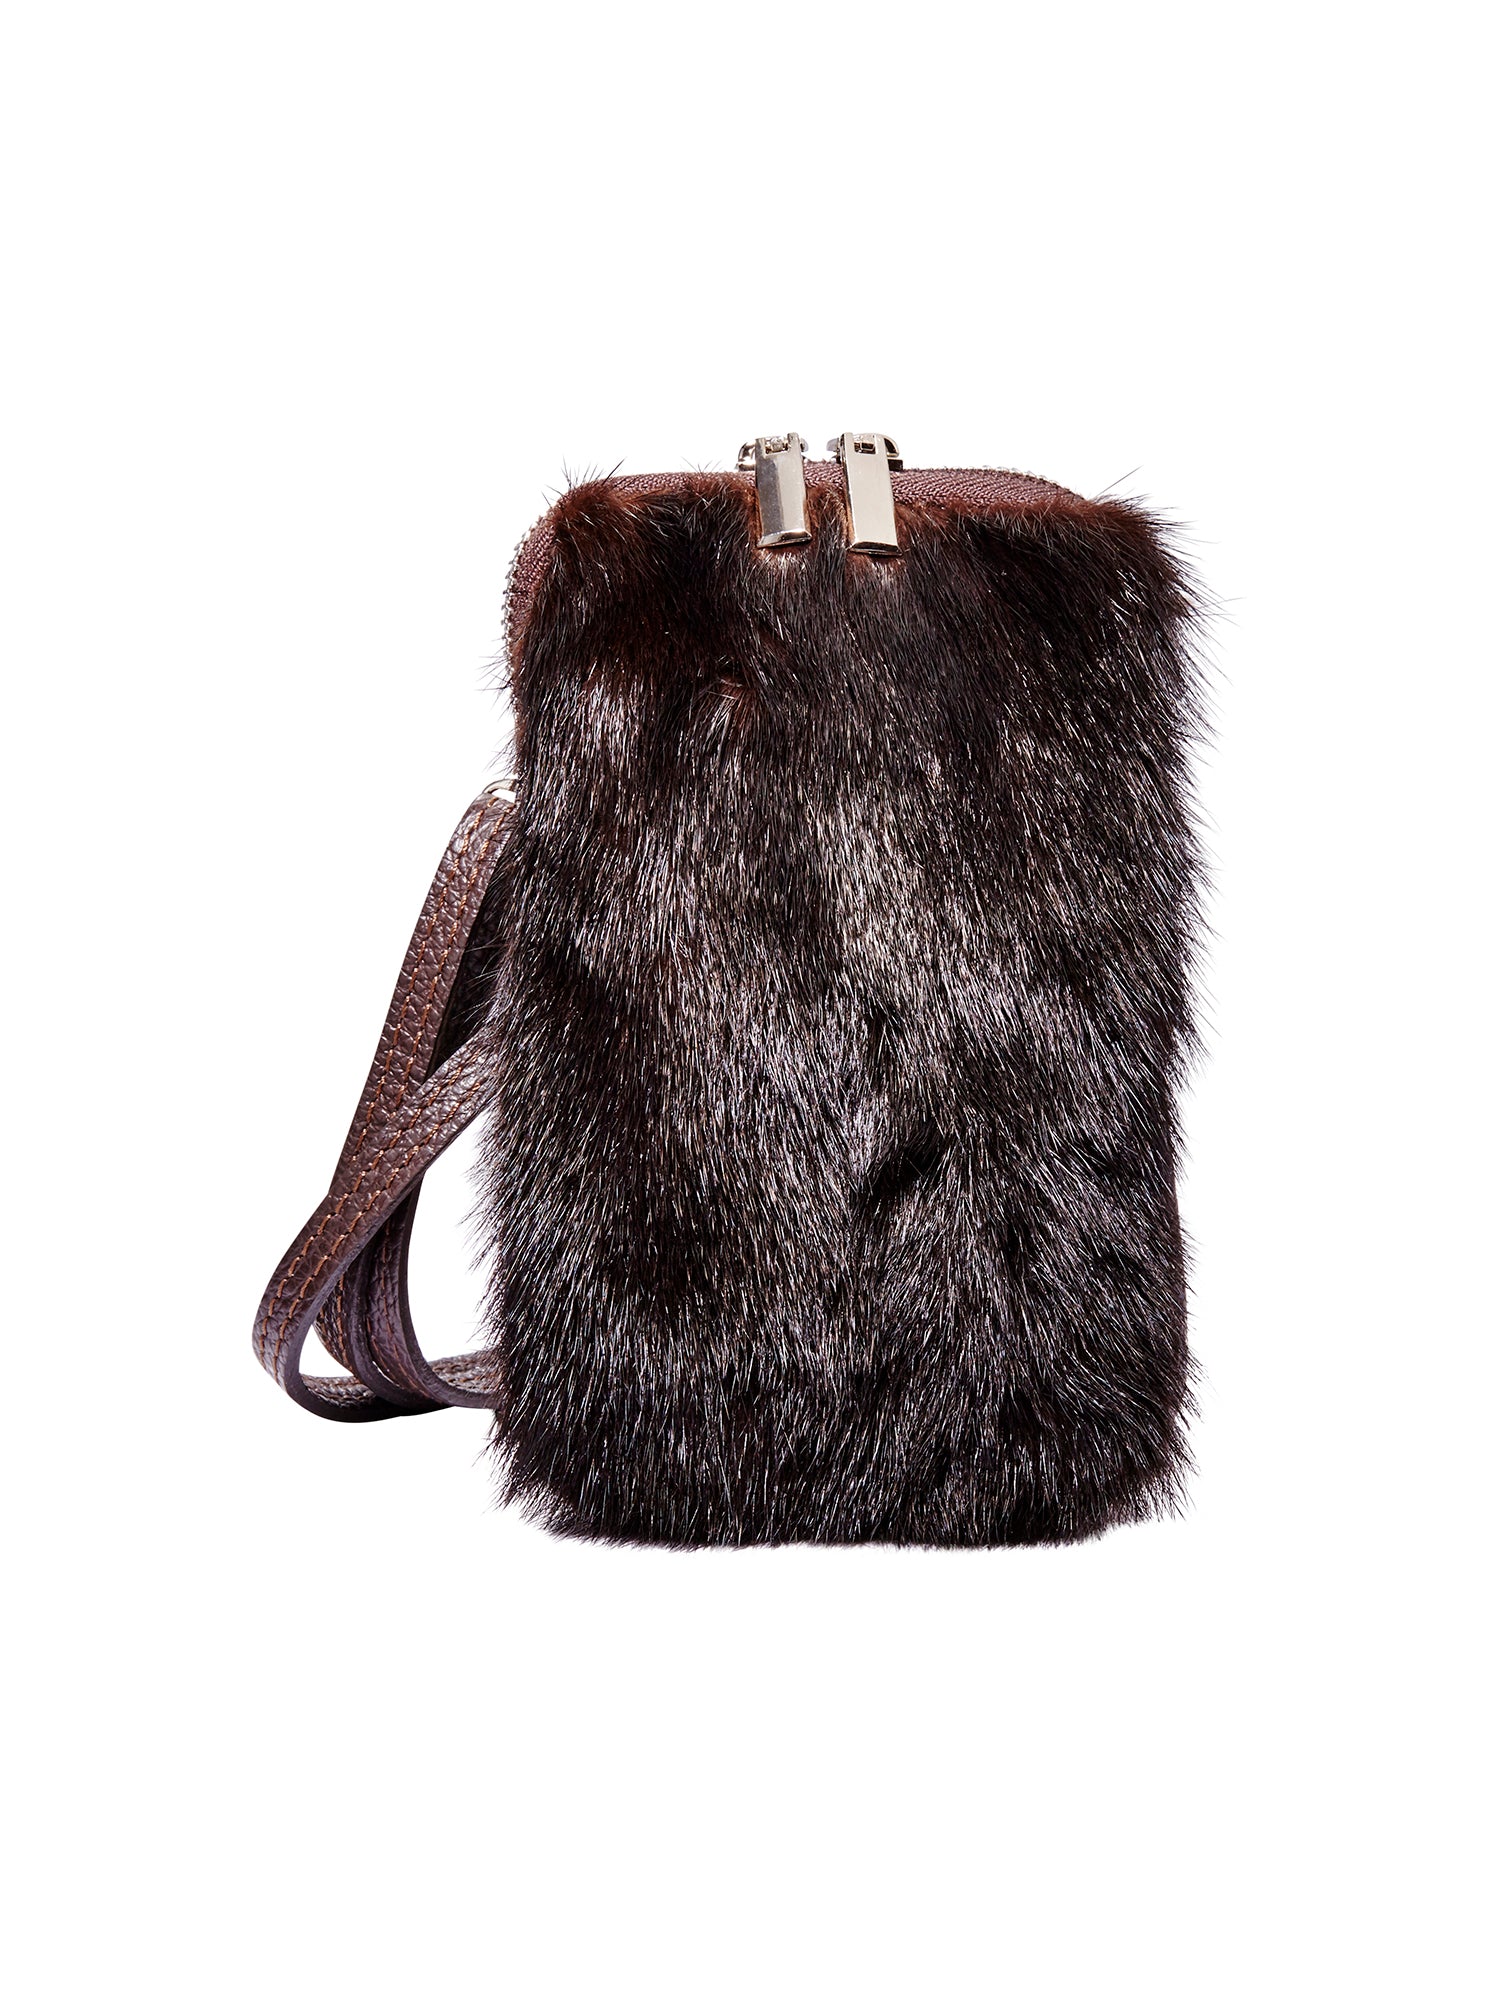 Corduroy Mink Fur Phone Bag with Leather Strap